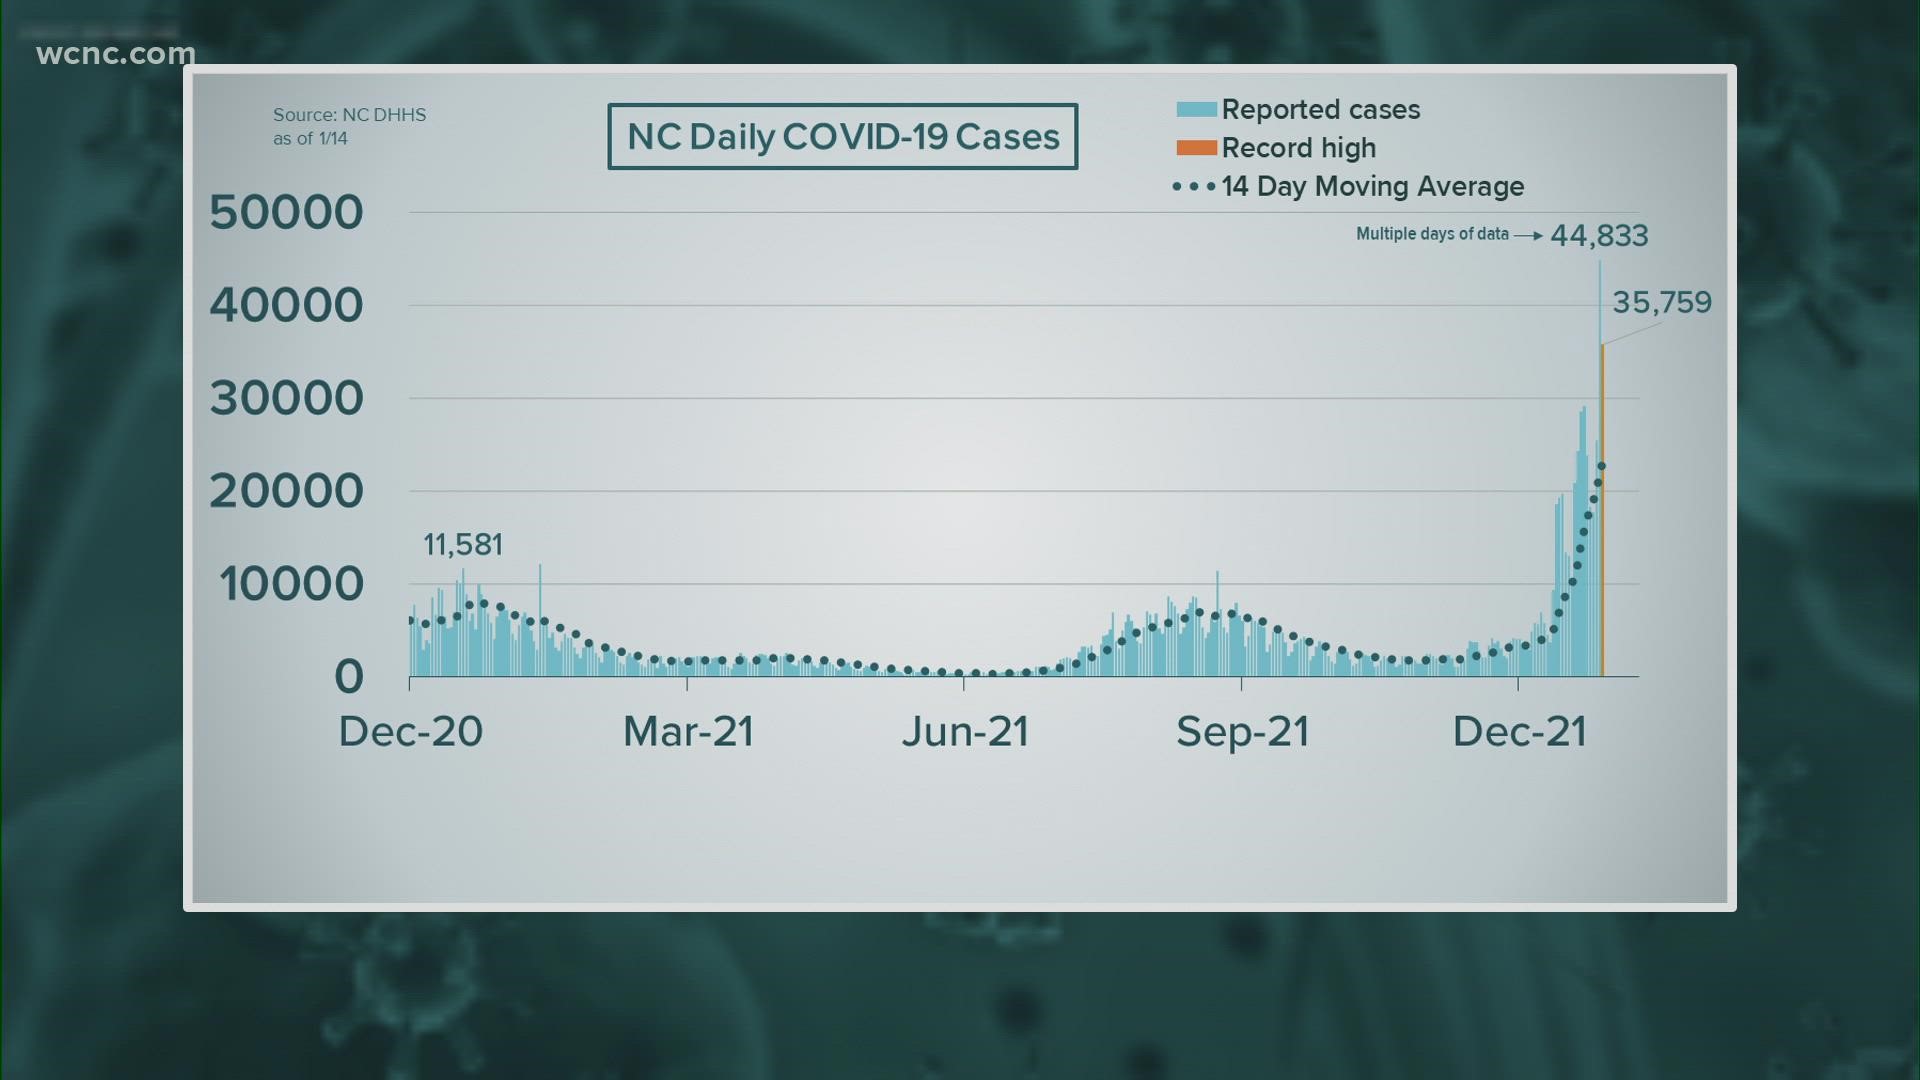 North Carolina health officials reported new records for three COVID-19 metrics Friday, as cases, hospitalizations and test positivity rates all hit pandemic highs.